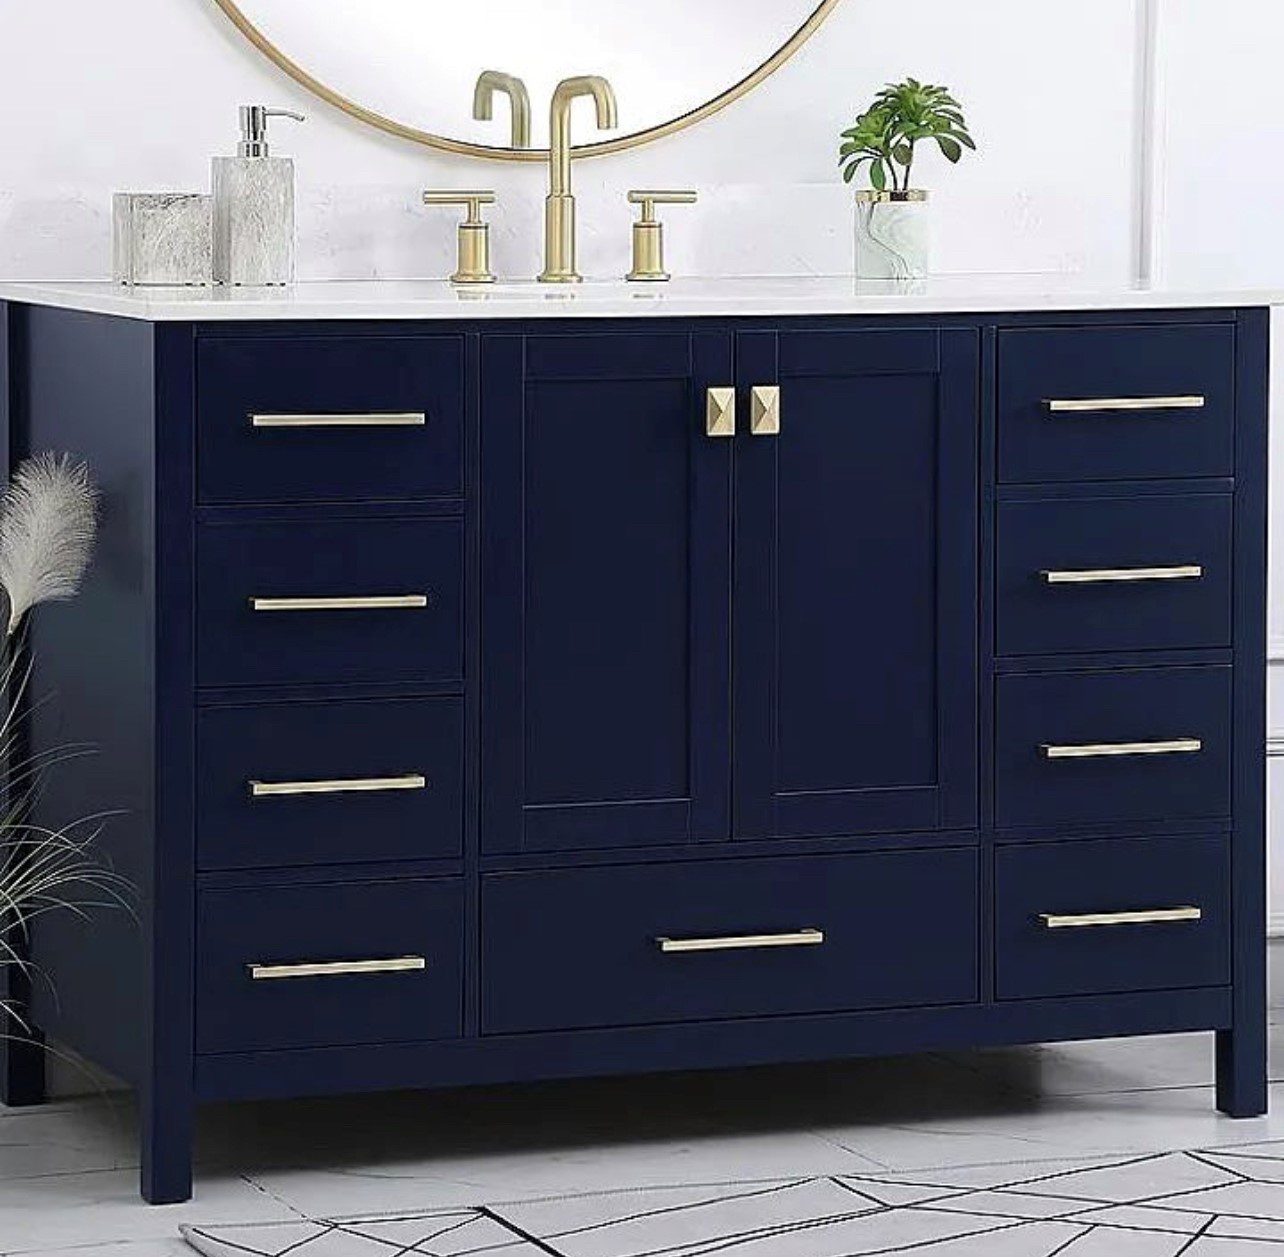 Hereford painted large bathroom vanity unit with undercounter basin